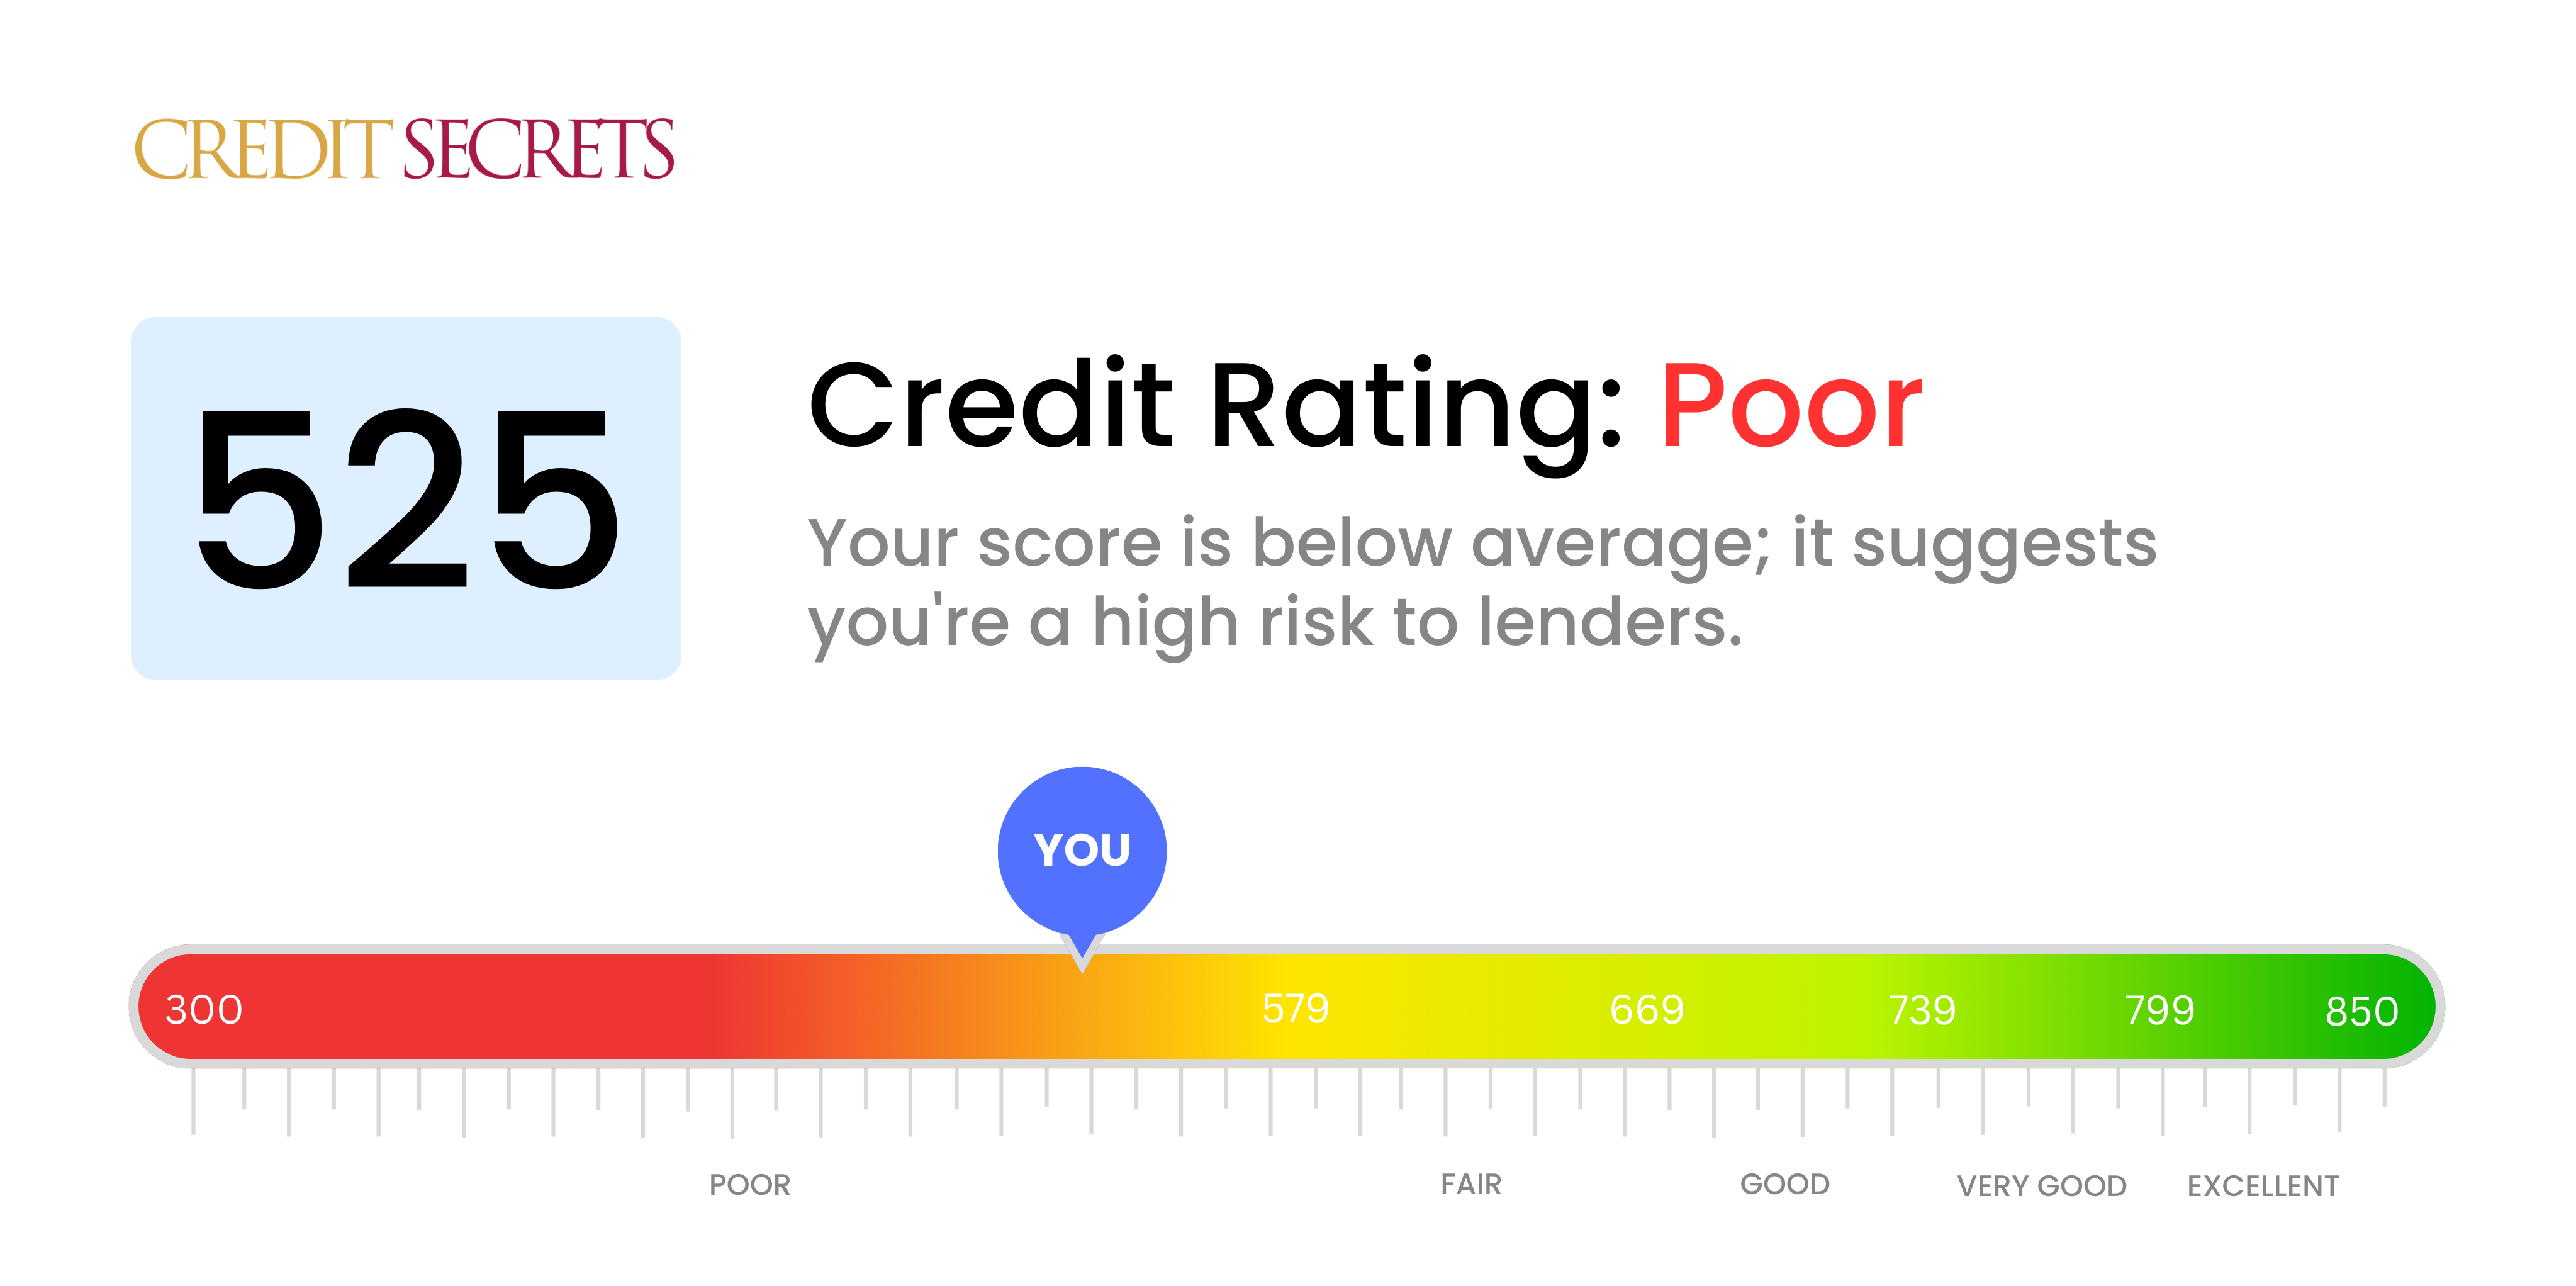 Is 525 a good credit score?